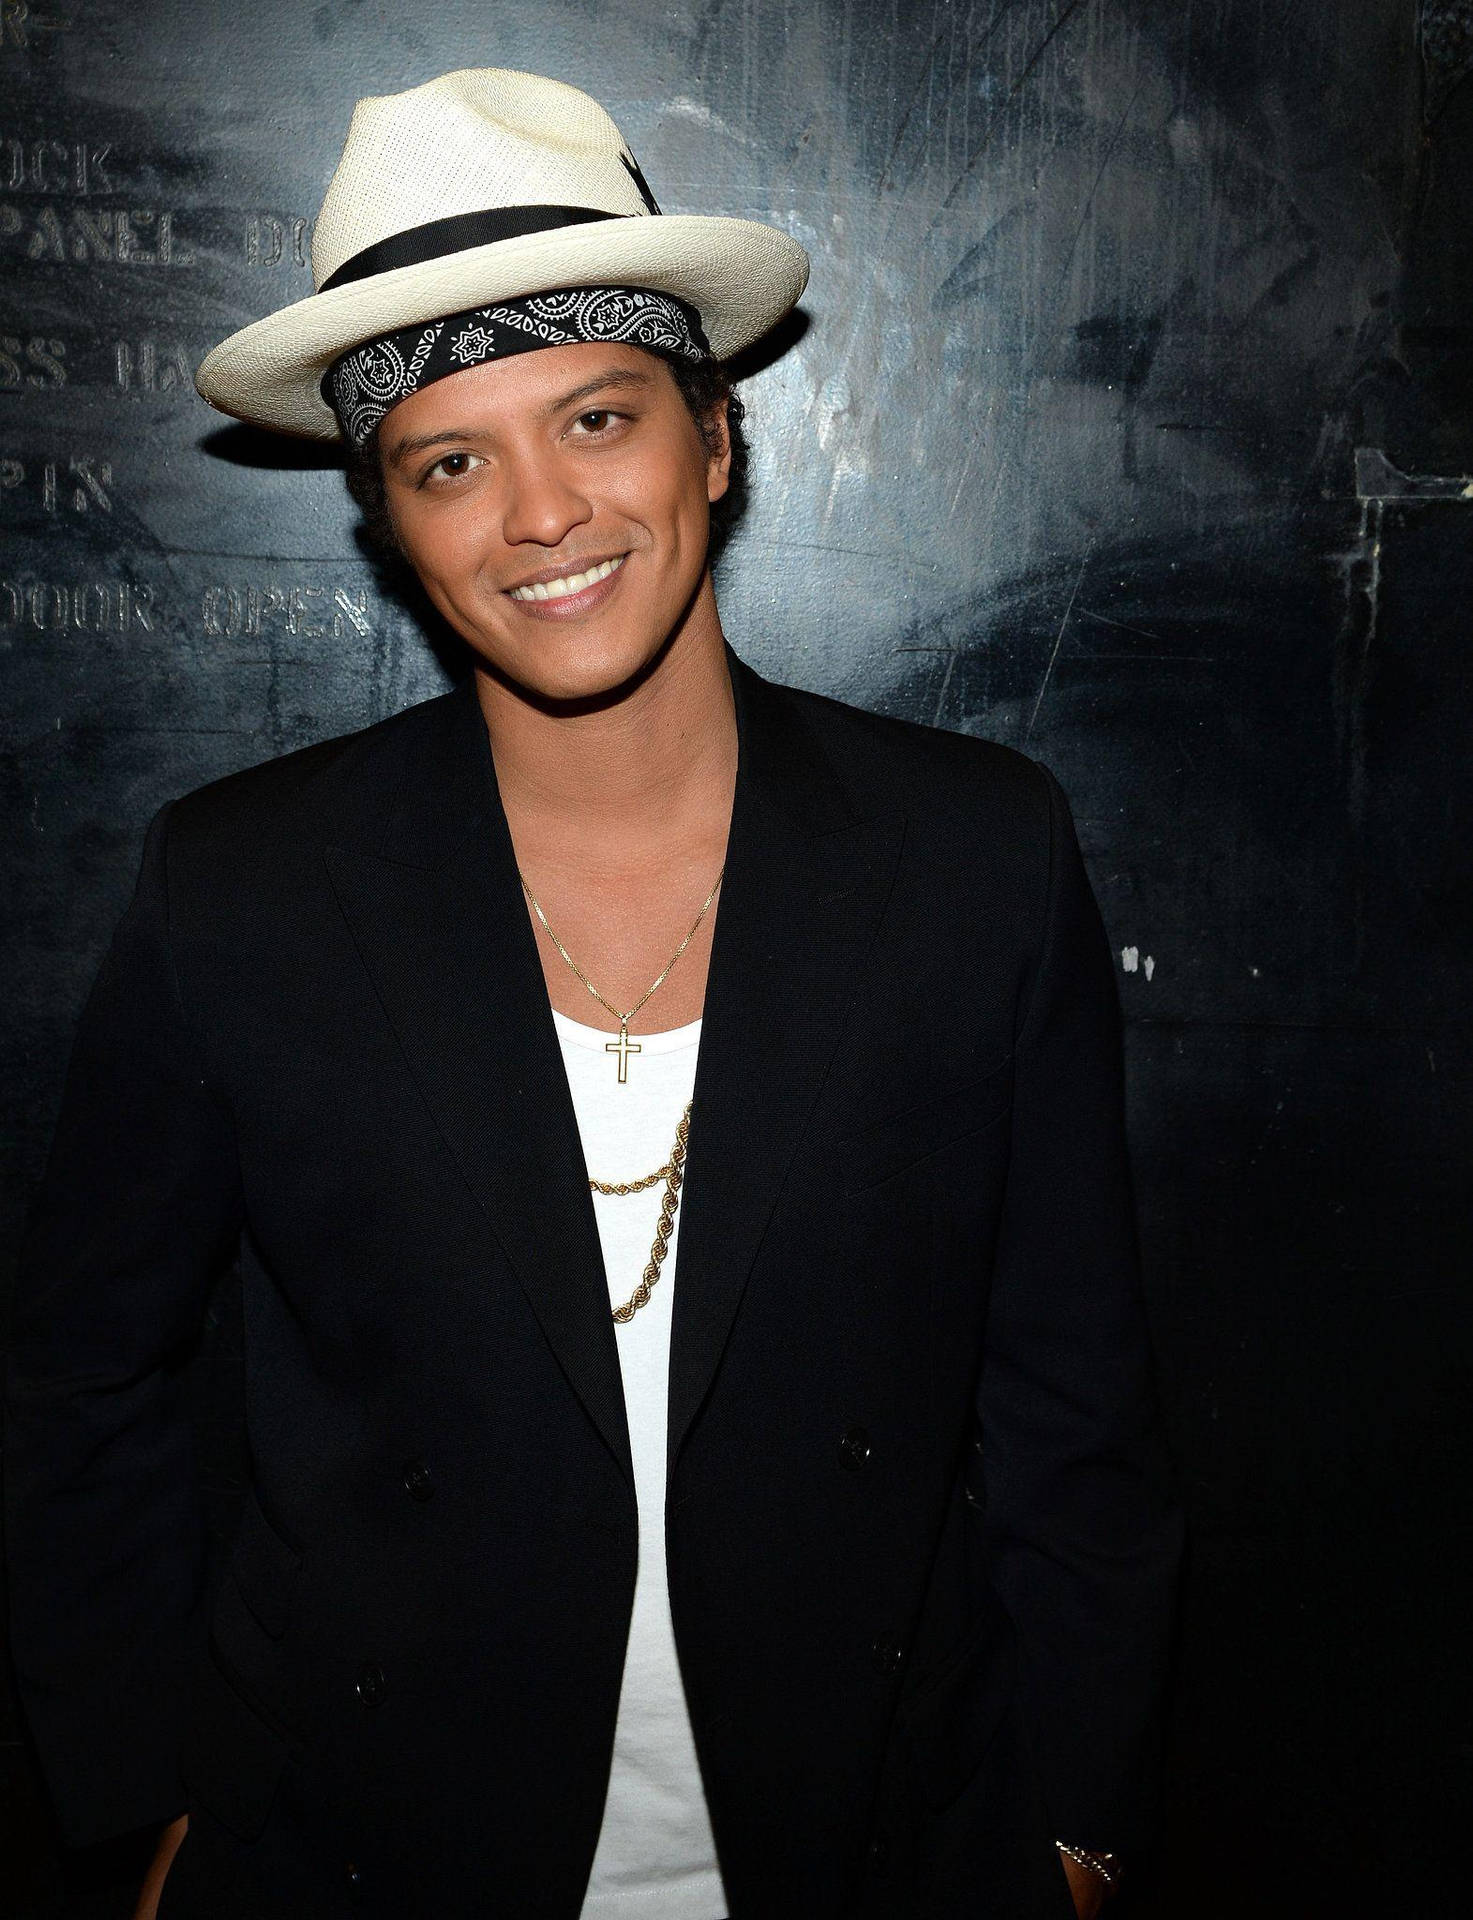 The incomparable Bruno Mars with his signature smile! Wallpaper